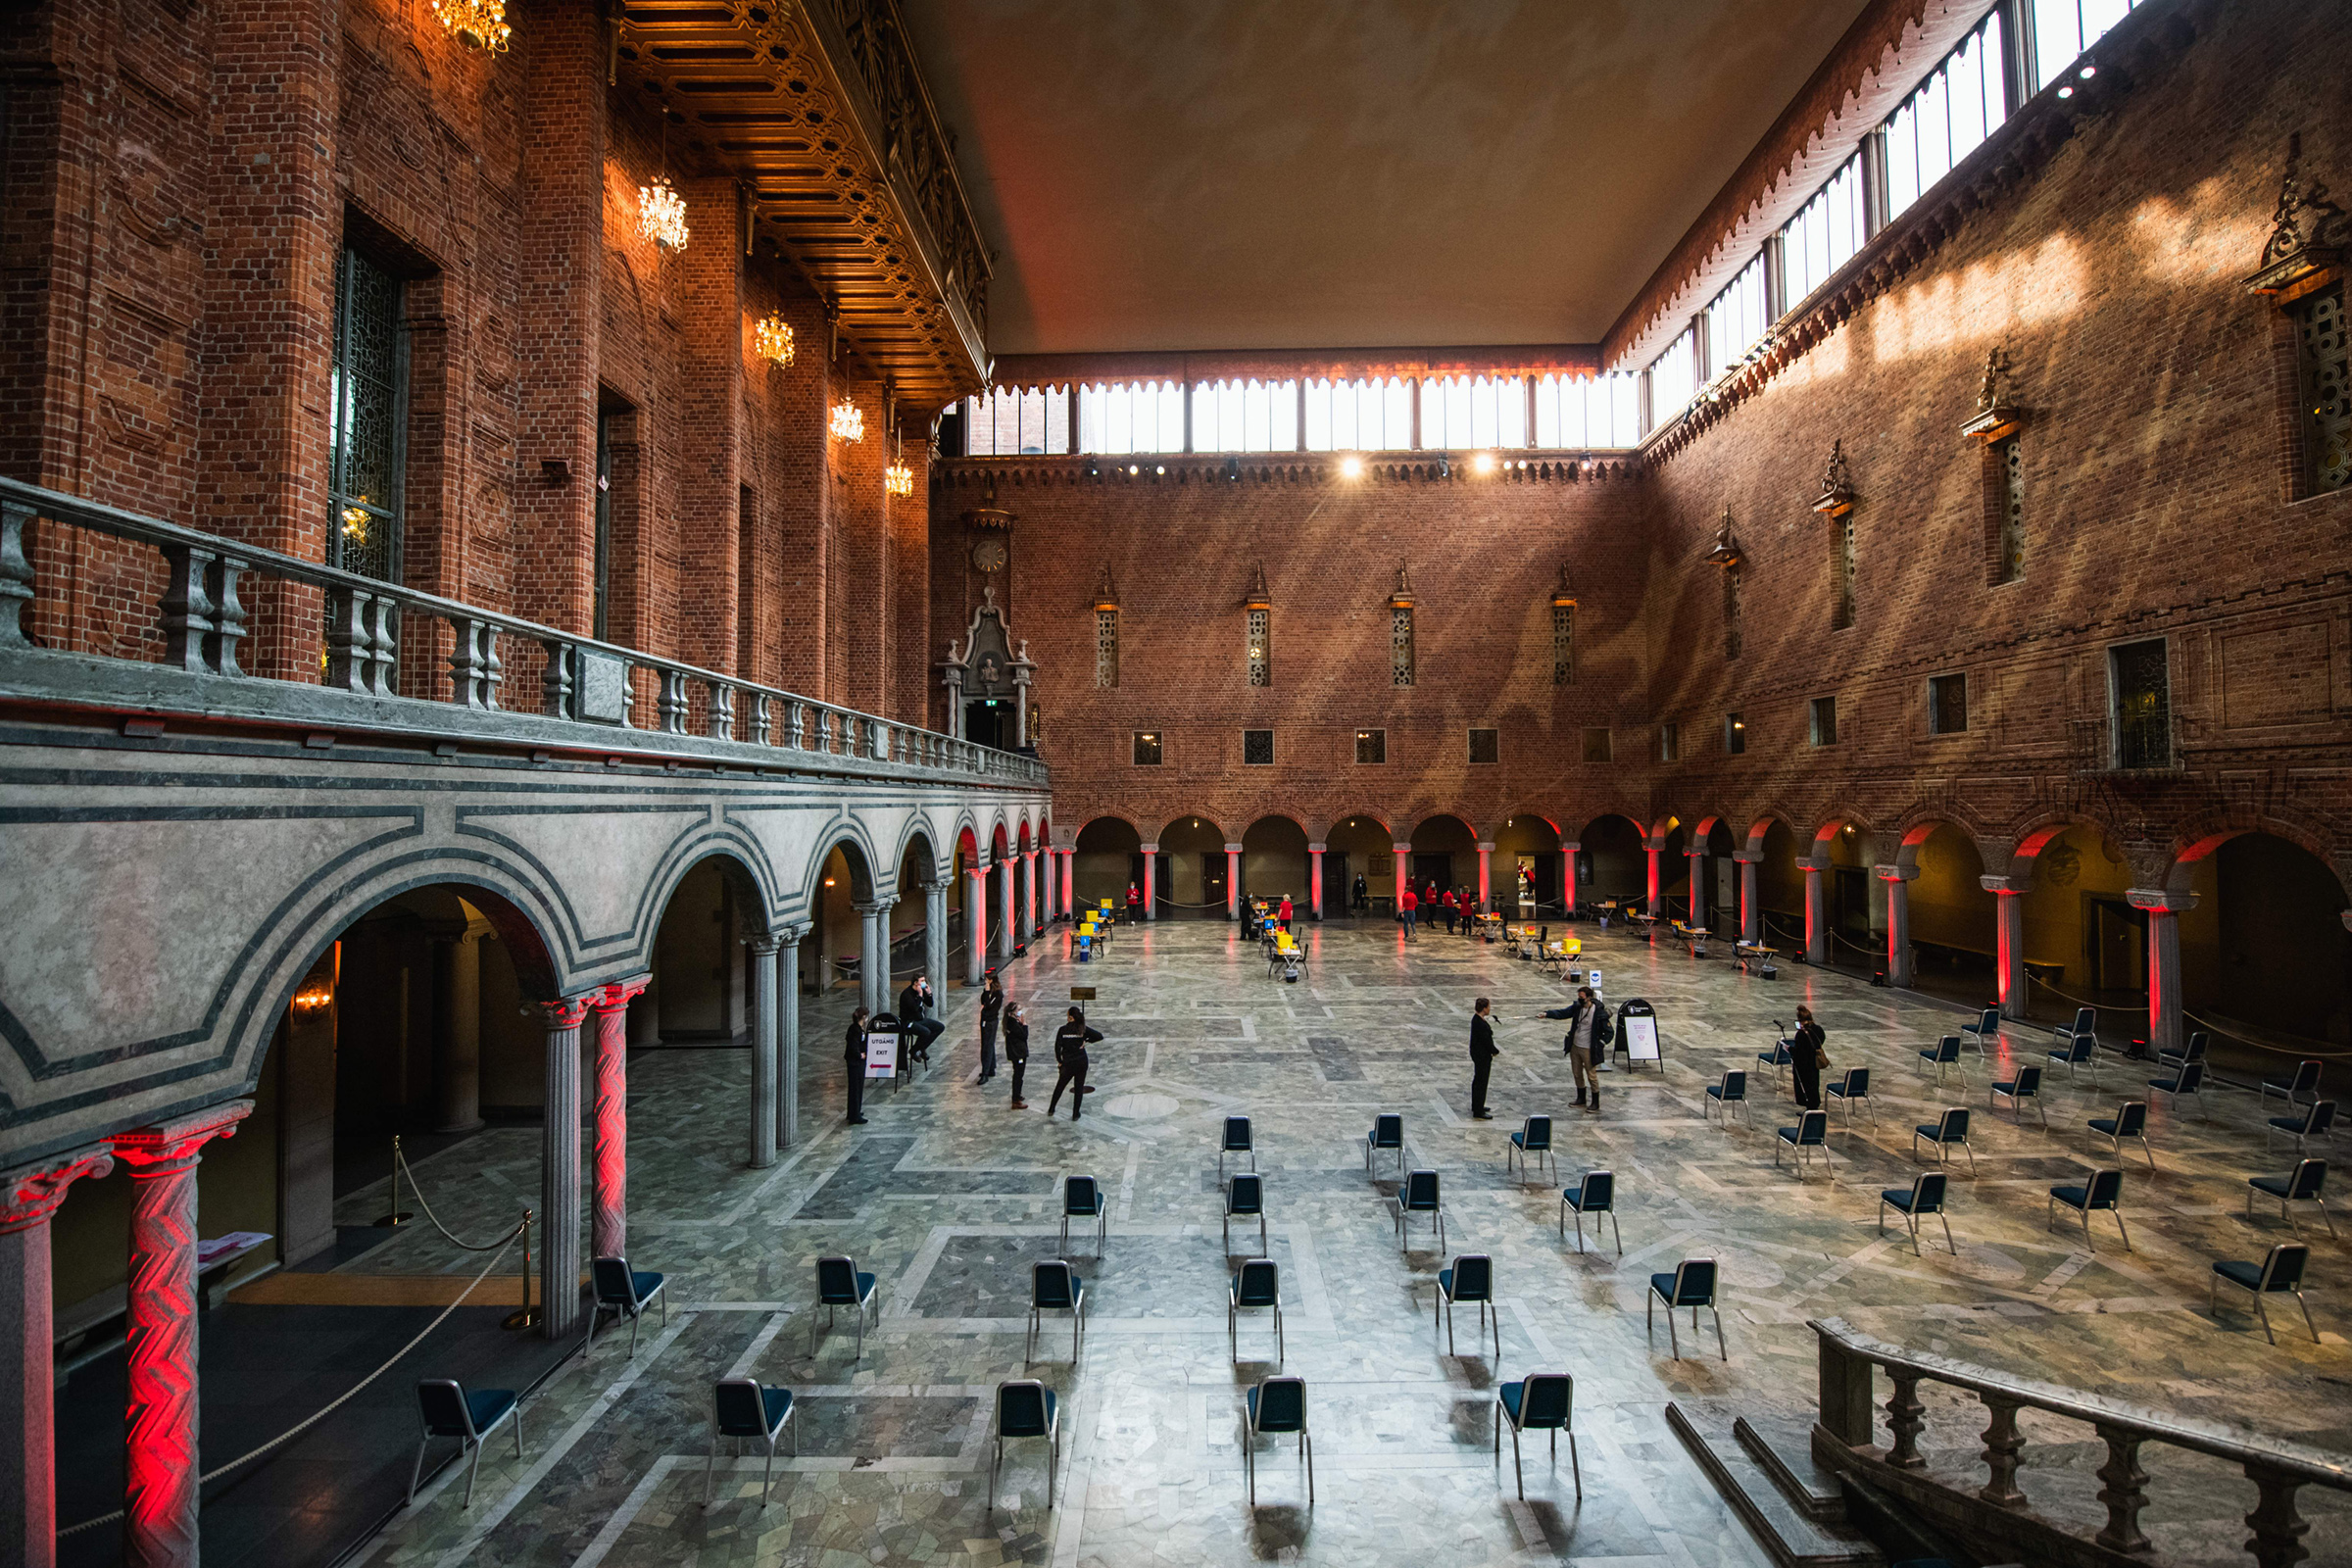 Preparations take place at Stockholm's City Hall to convert the Nobel Prize venue into a COVID-19 vaccination site on Feb. 21, 2021. (Jonathan Nackstrand—AFP/Getty Images)